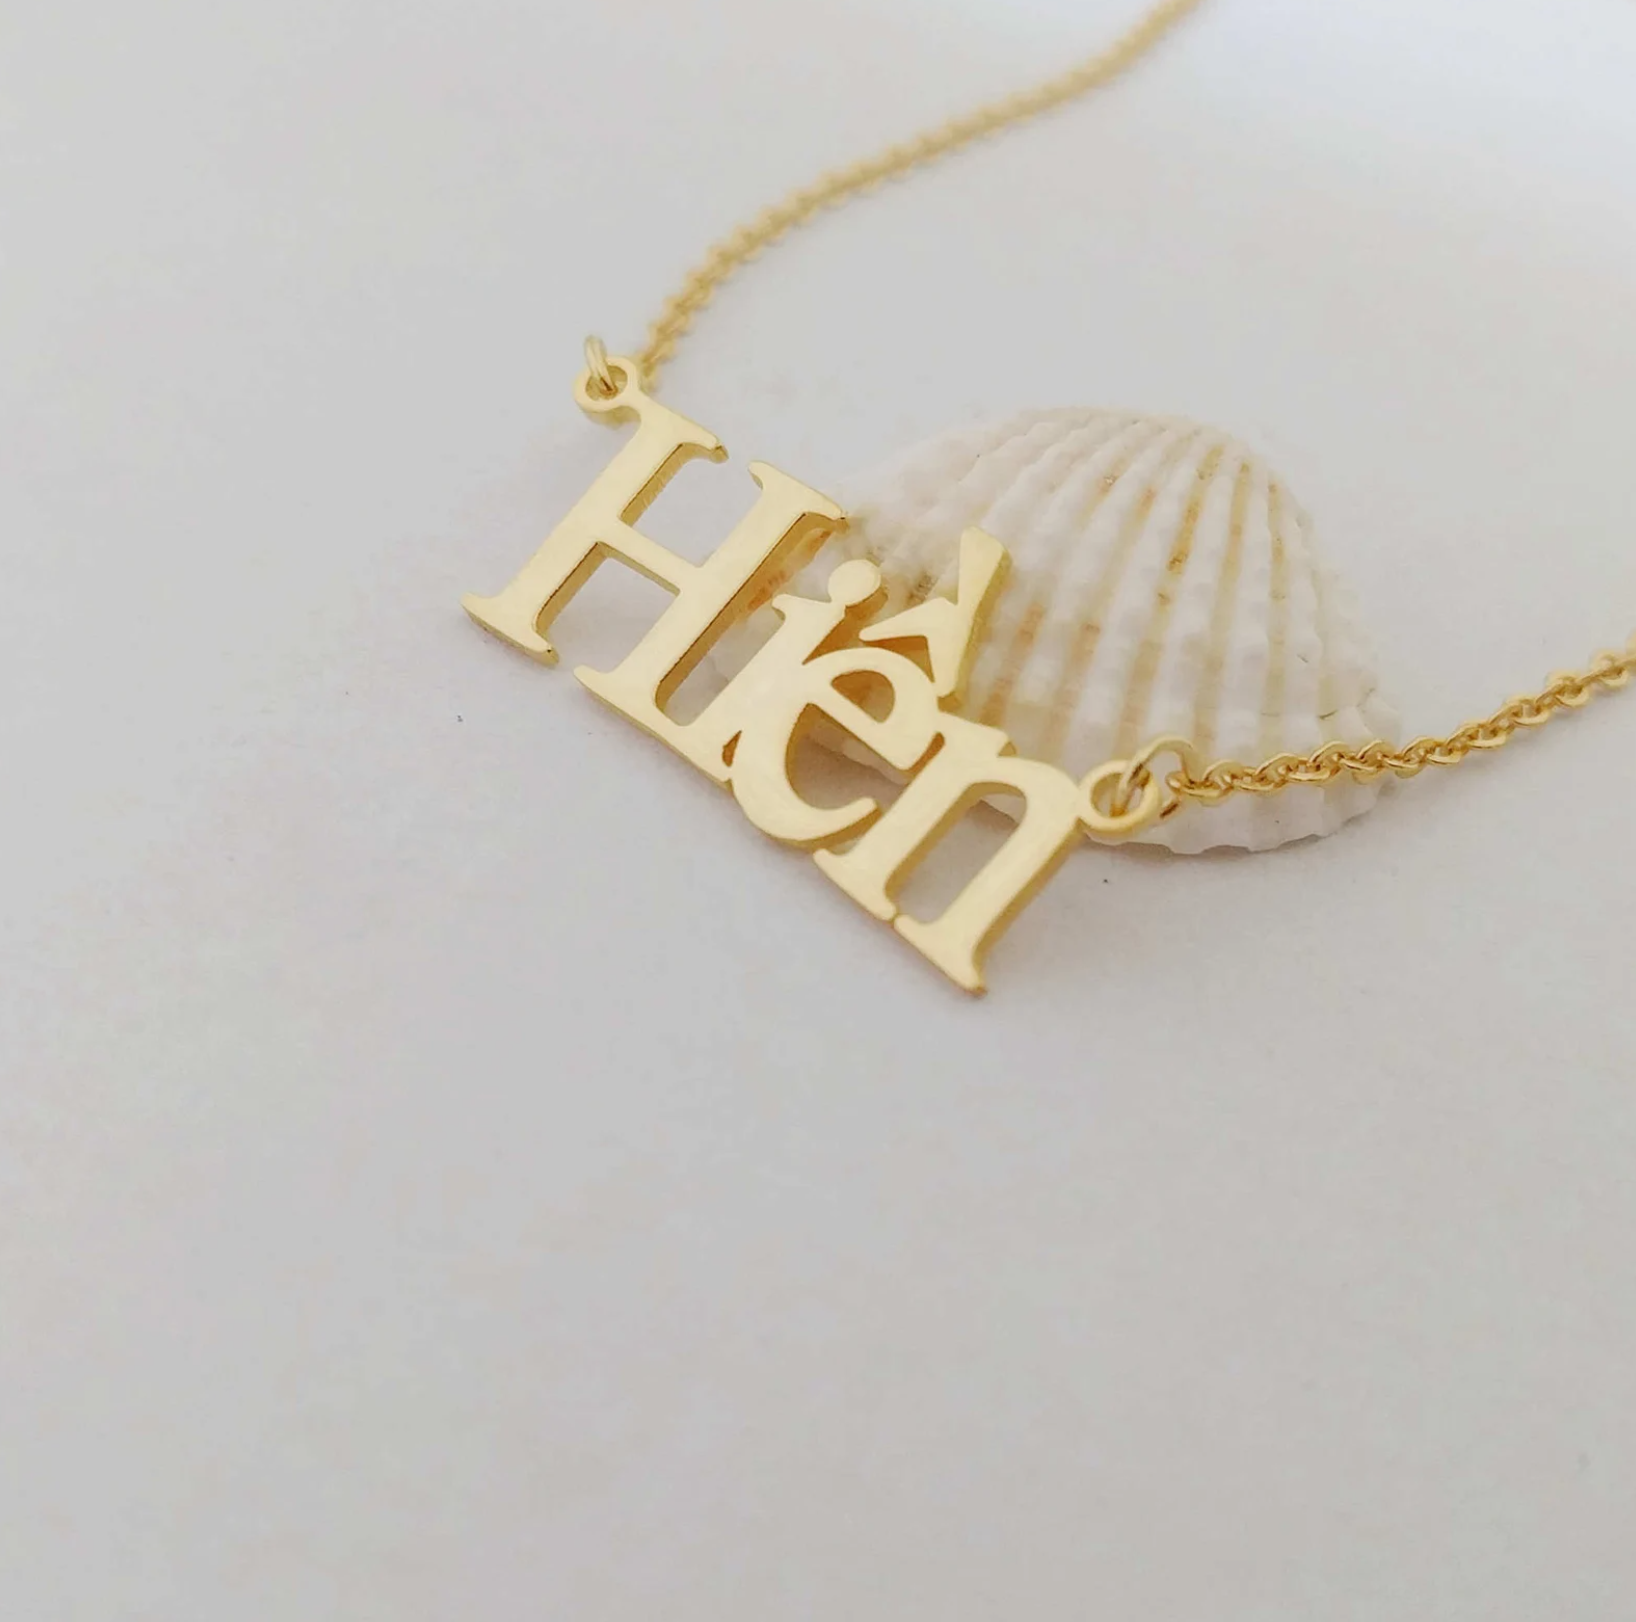 Gorgeous Personalised Vietnamese Name Necklace